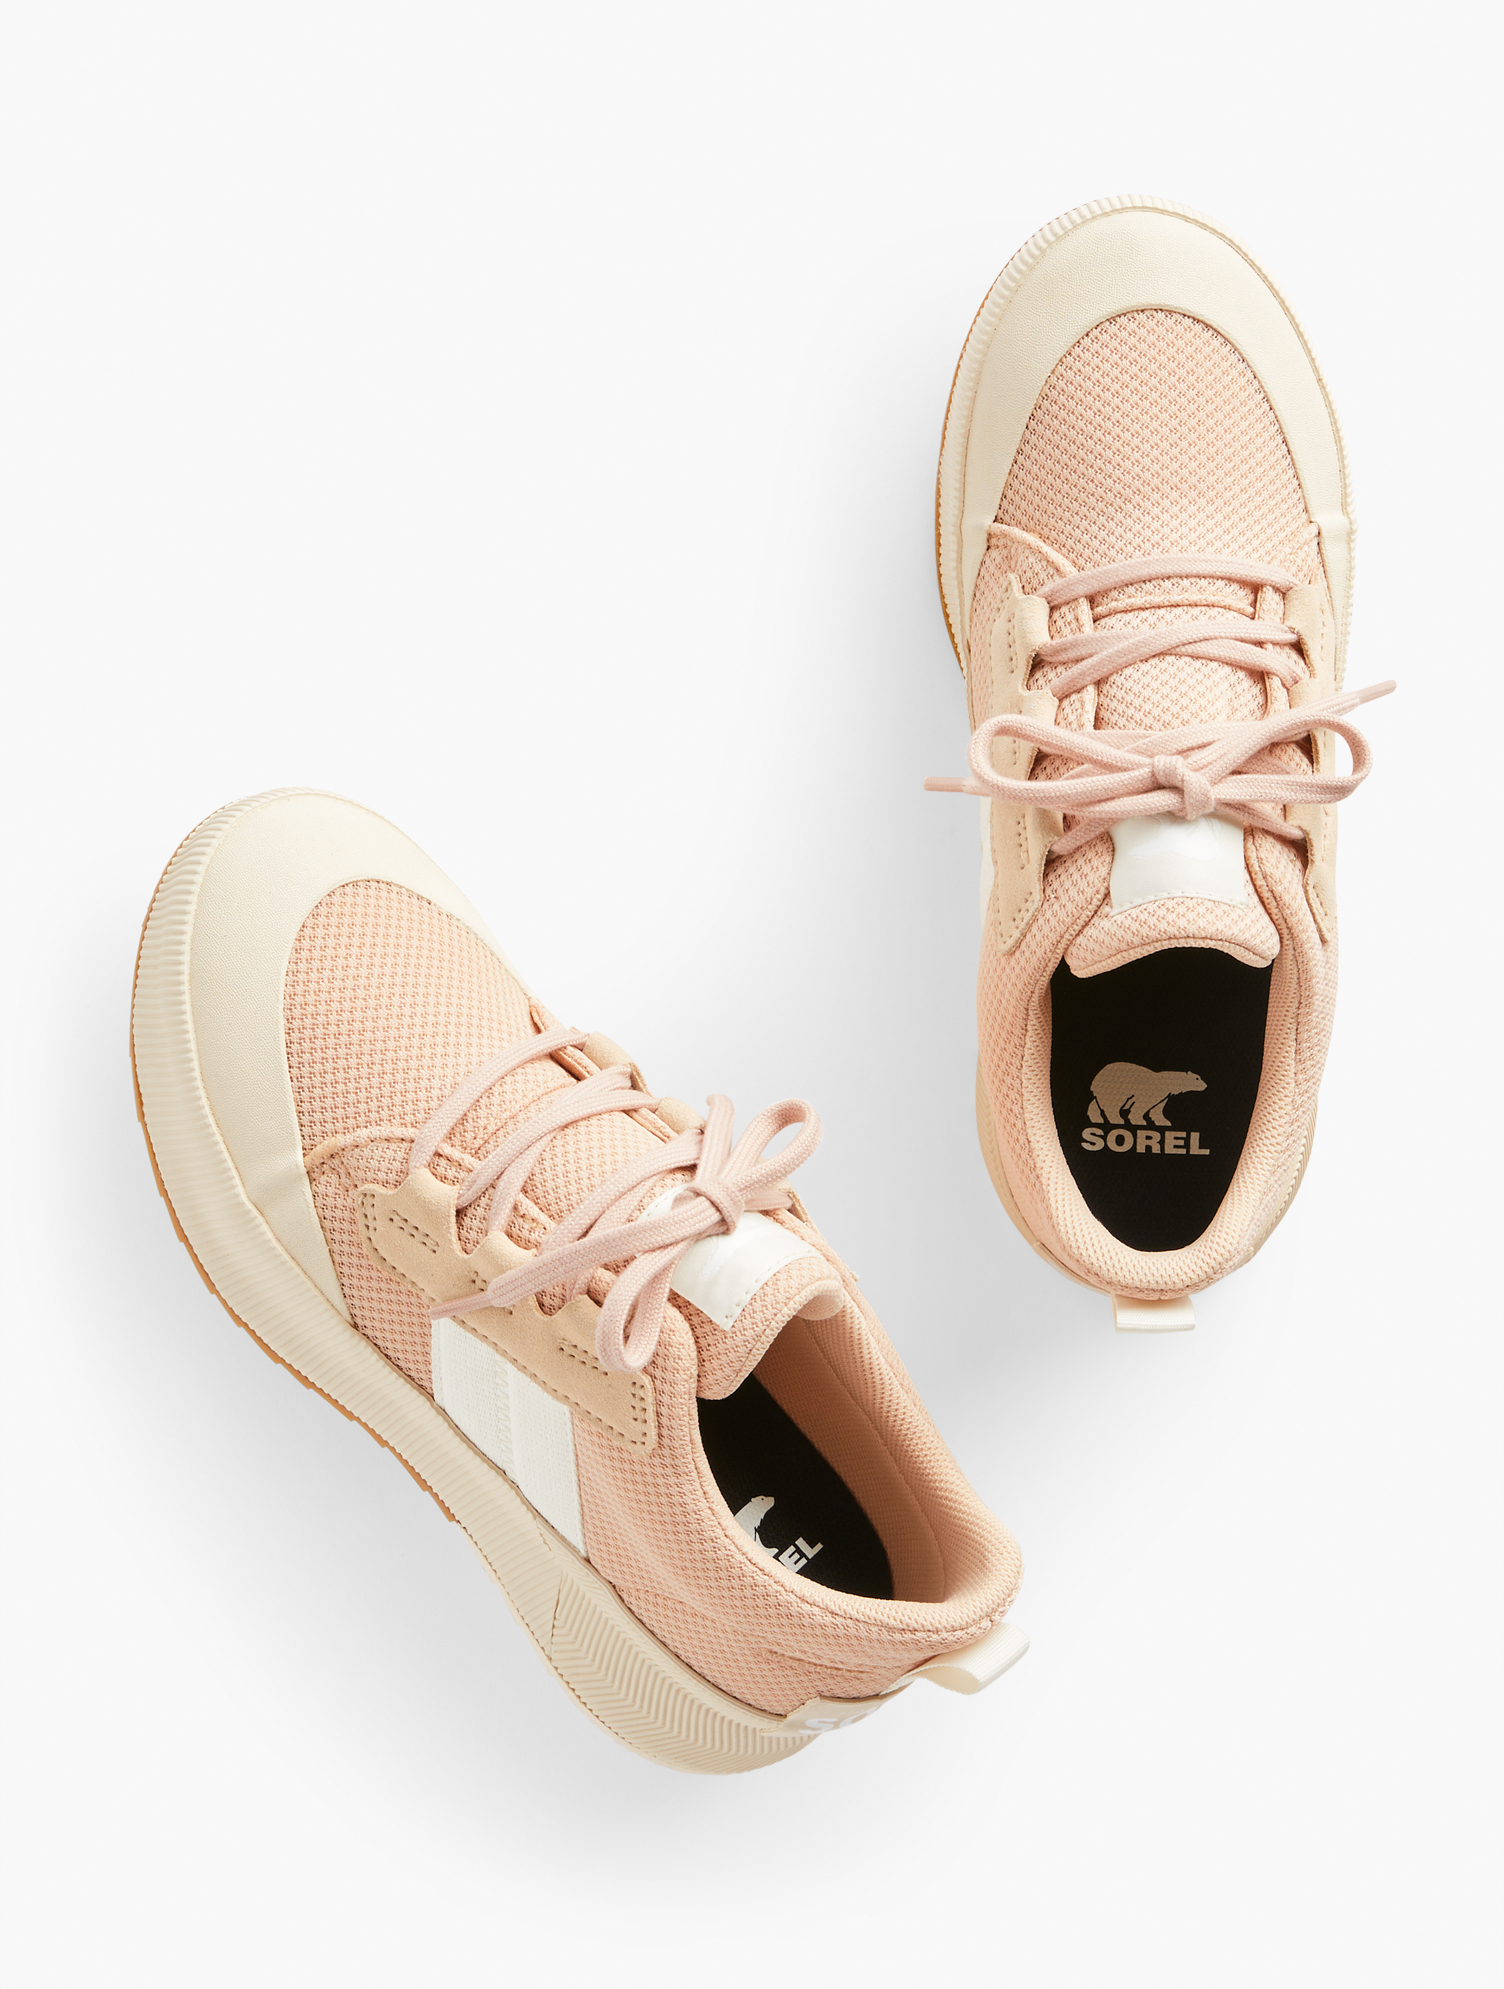 Talbots Out N Aboutâ¢ Waterproof Sneakers - Nova Sand/chalk - 9m  In Nova Sand,chalk